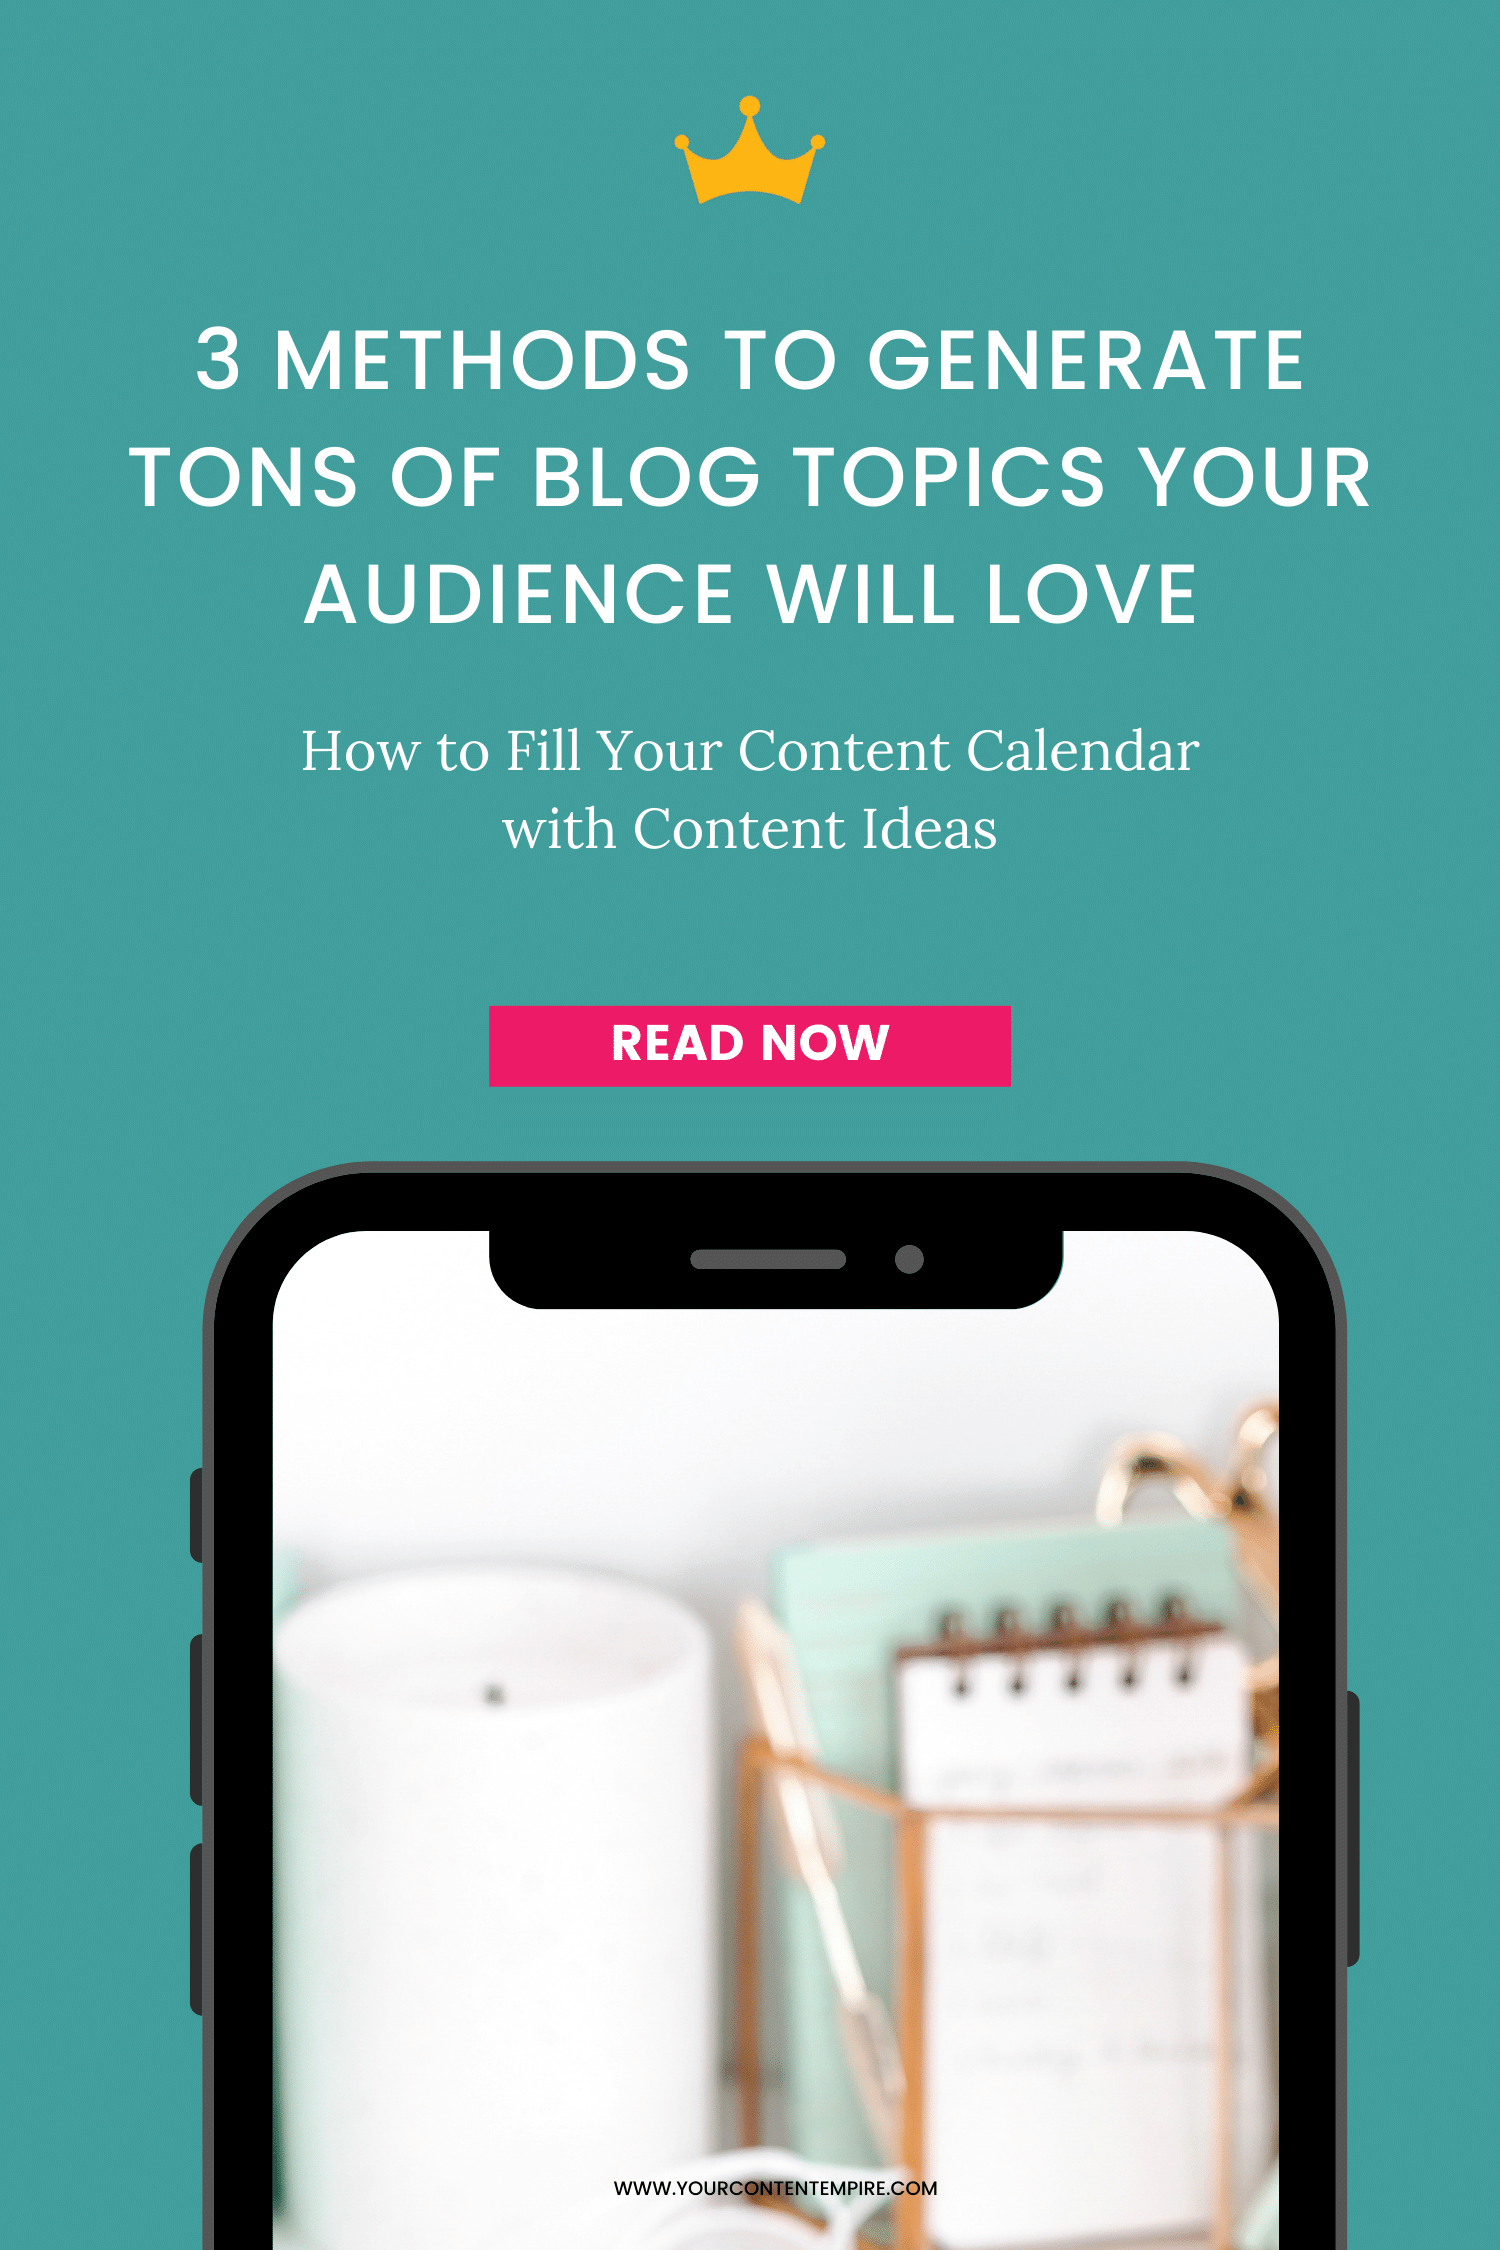 3 Methods to Generate Tons of Blog Topics Your Audience Will Love